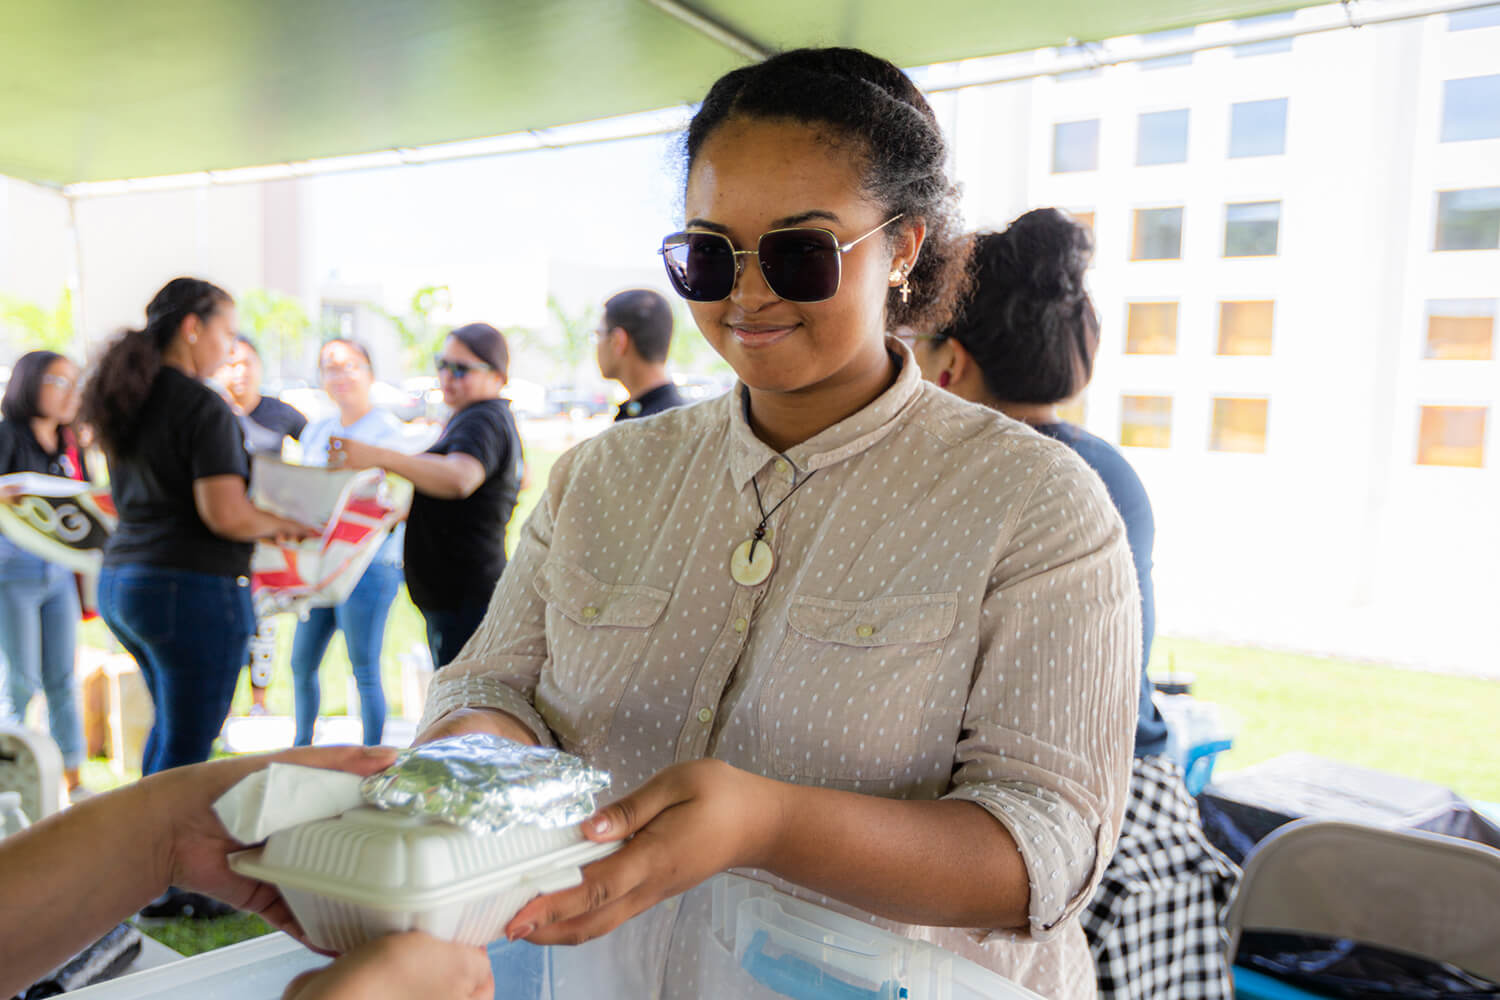 C’Lita Taitanohands out food during the community service project of the UOG CLASS on Nov. 22.